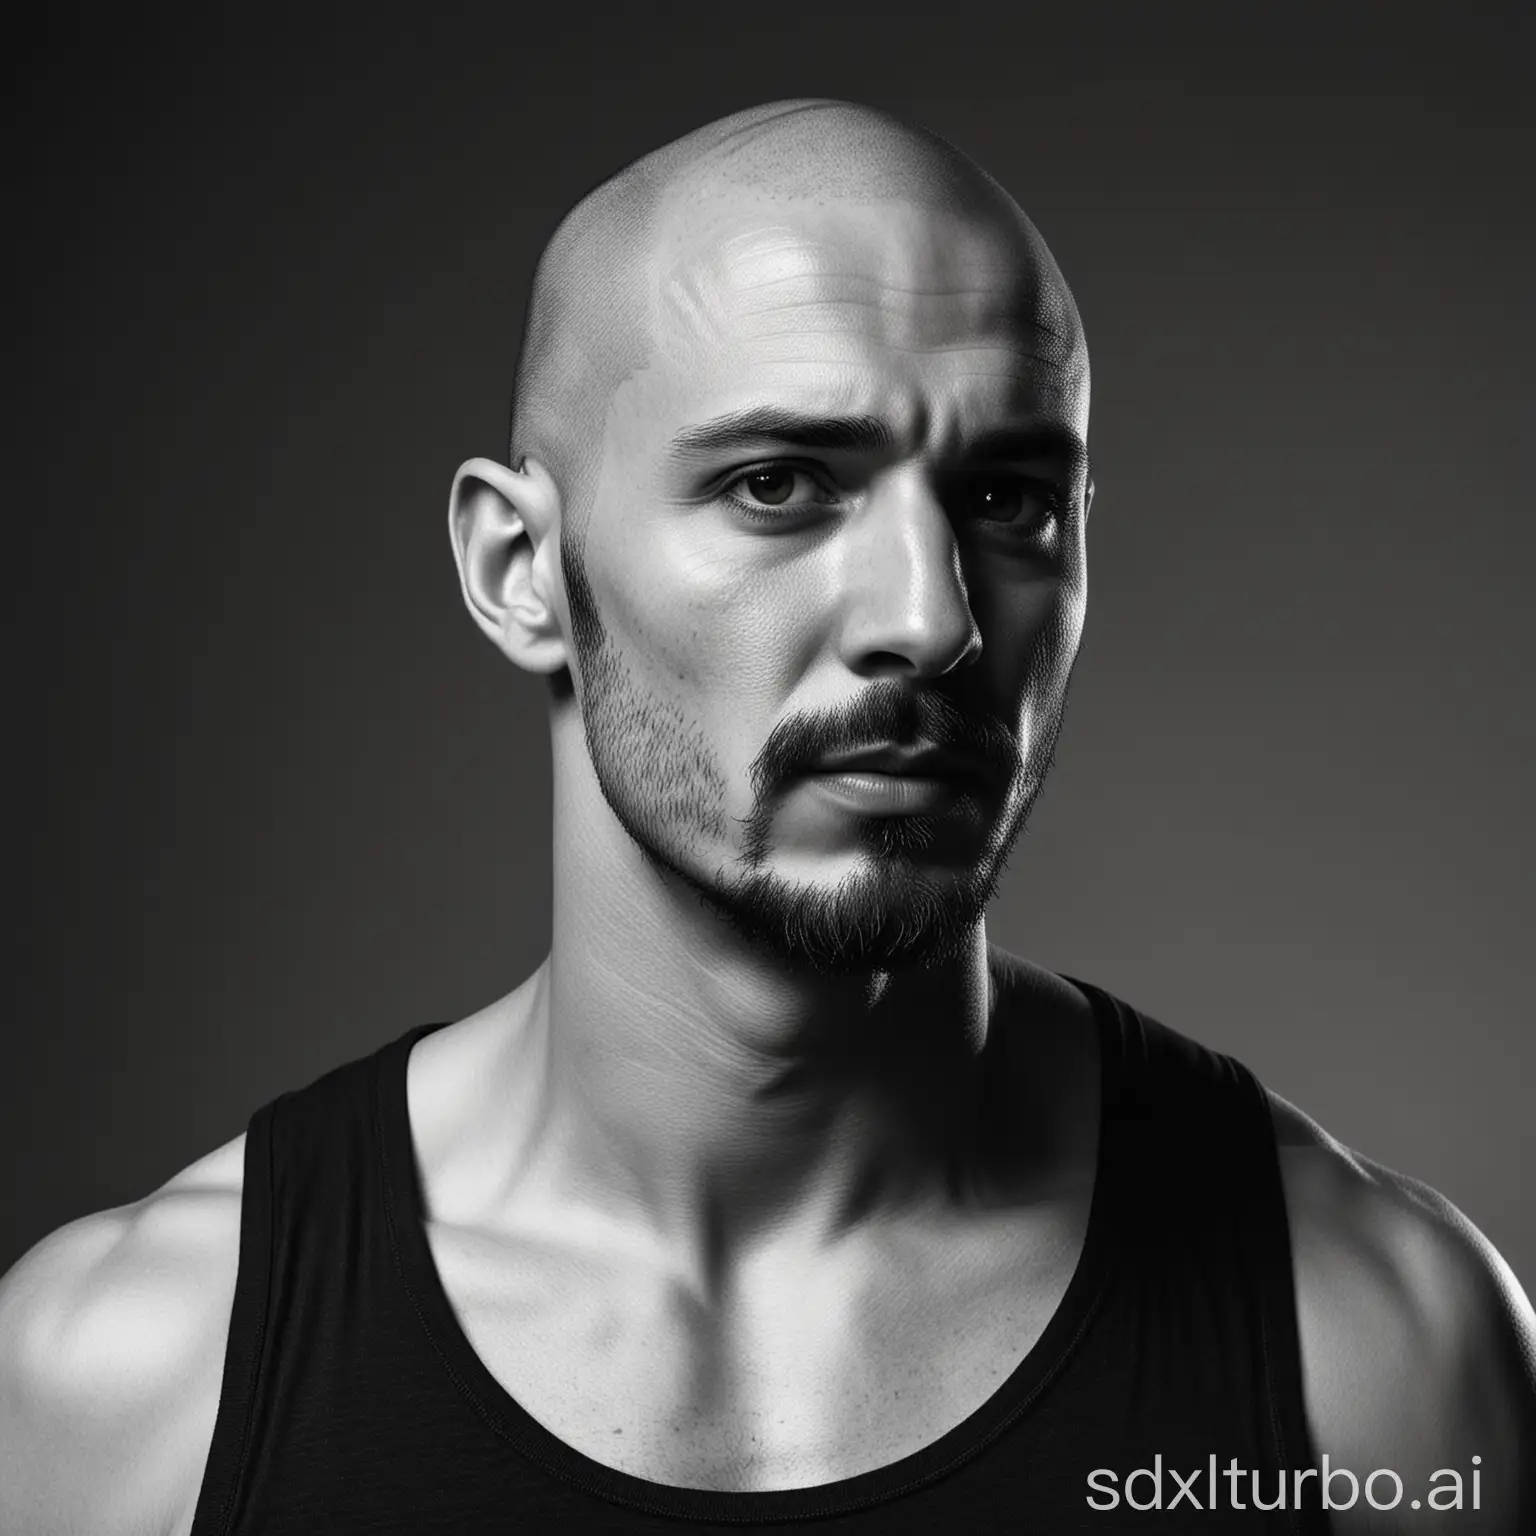 Modern-Stylish-Man-with-Shaved-Bald-Head-and-Sportswear-in-Black-and-White-Portrait